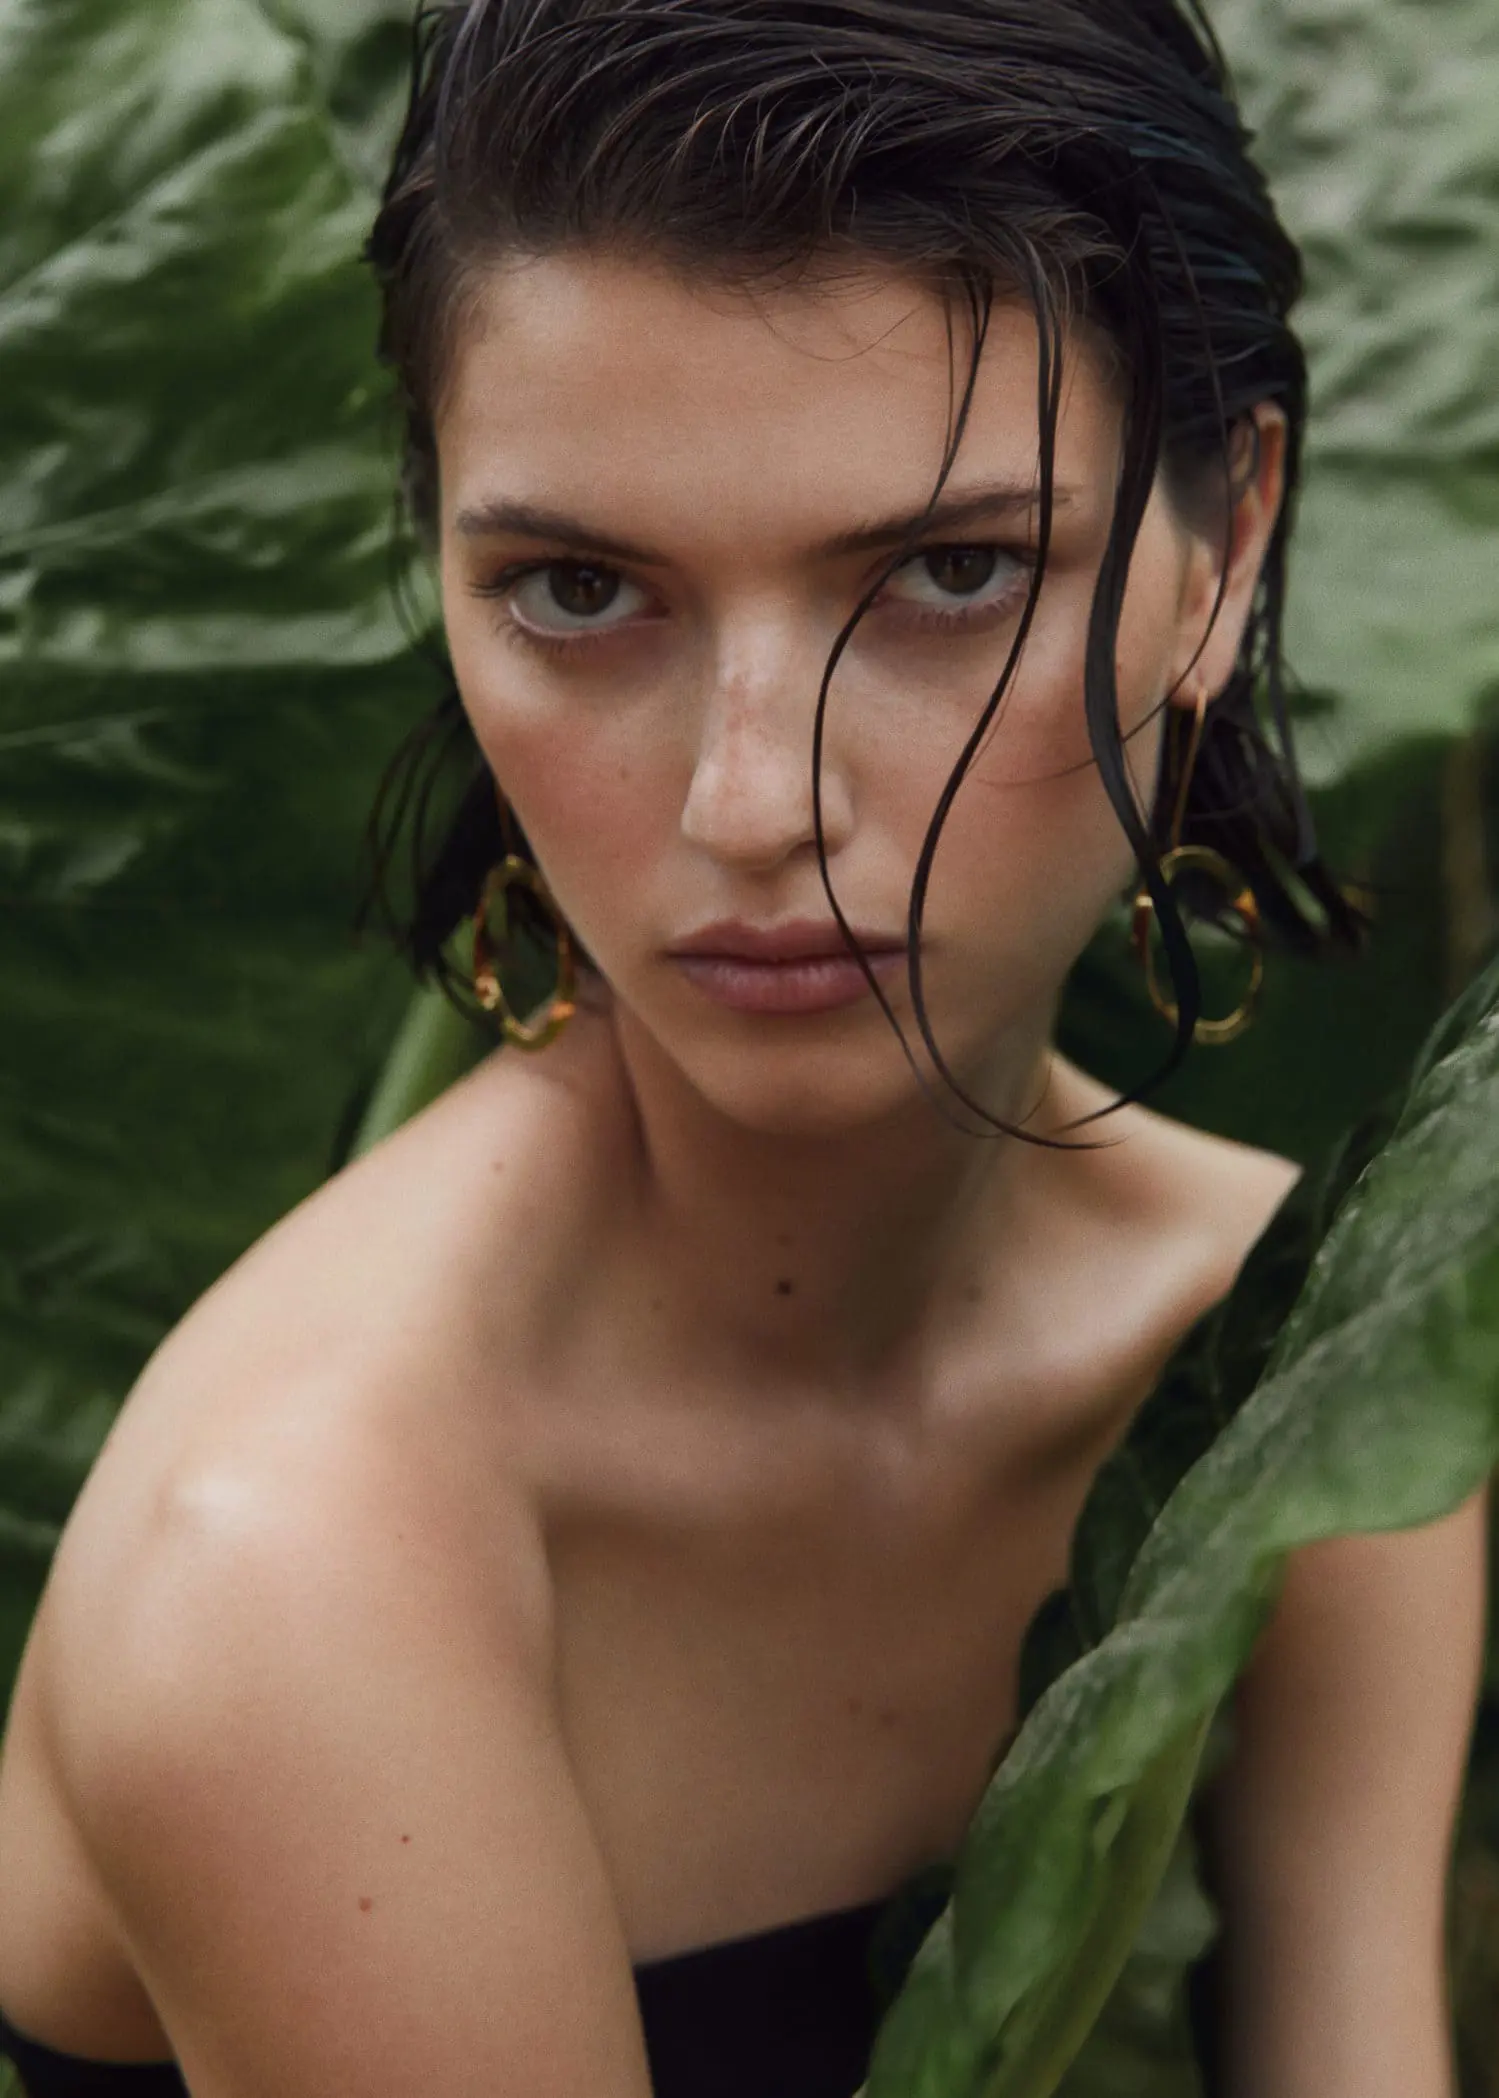 Mango Rigid oval earrings. a beautiful woman with wet hair standing next to a plant. 